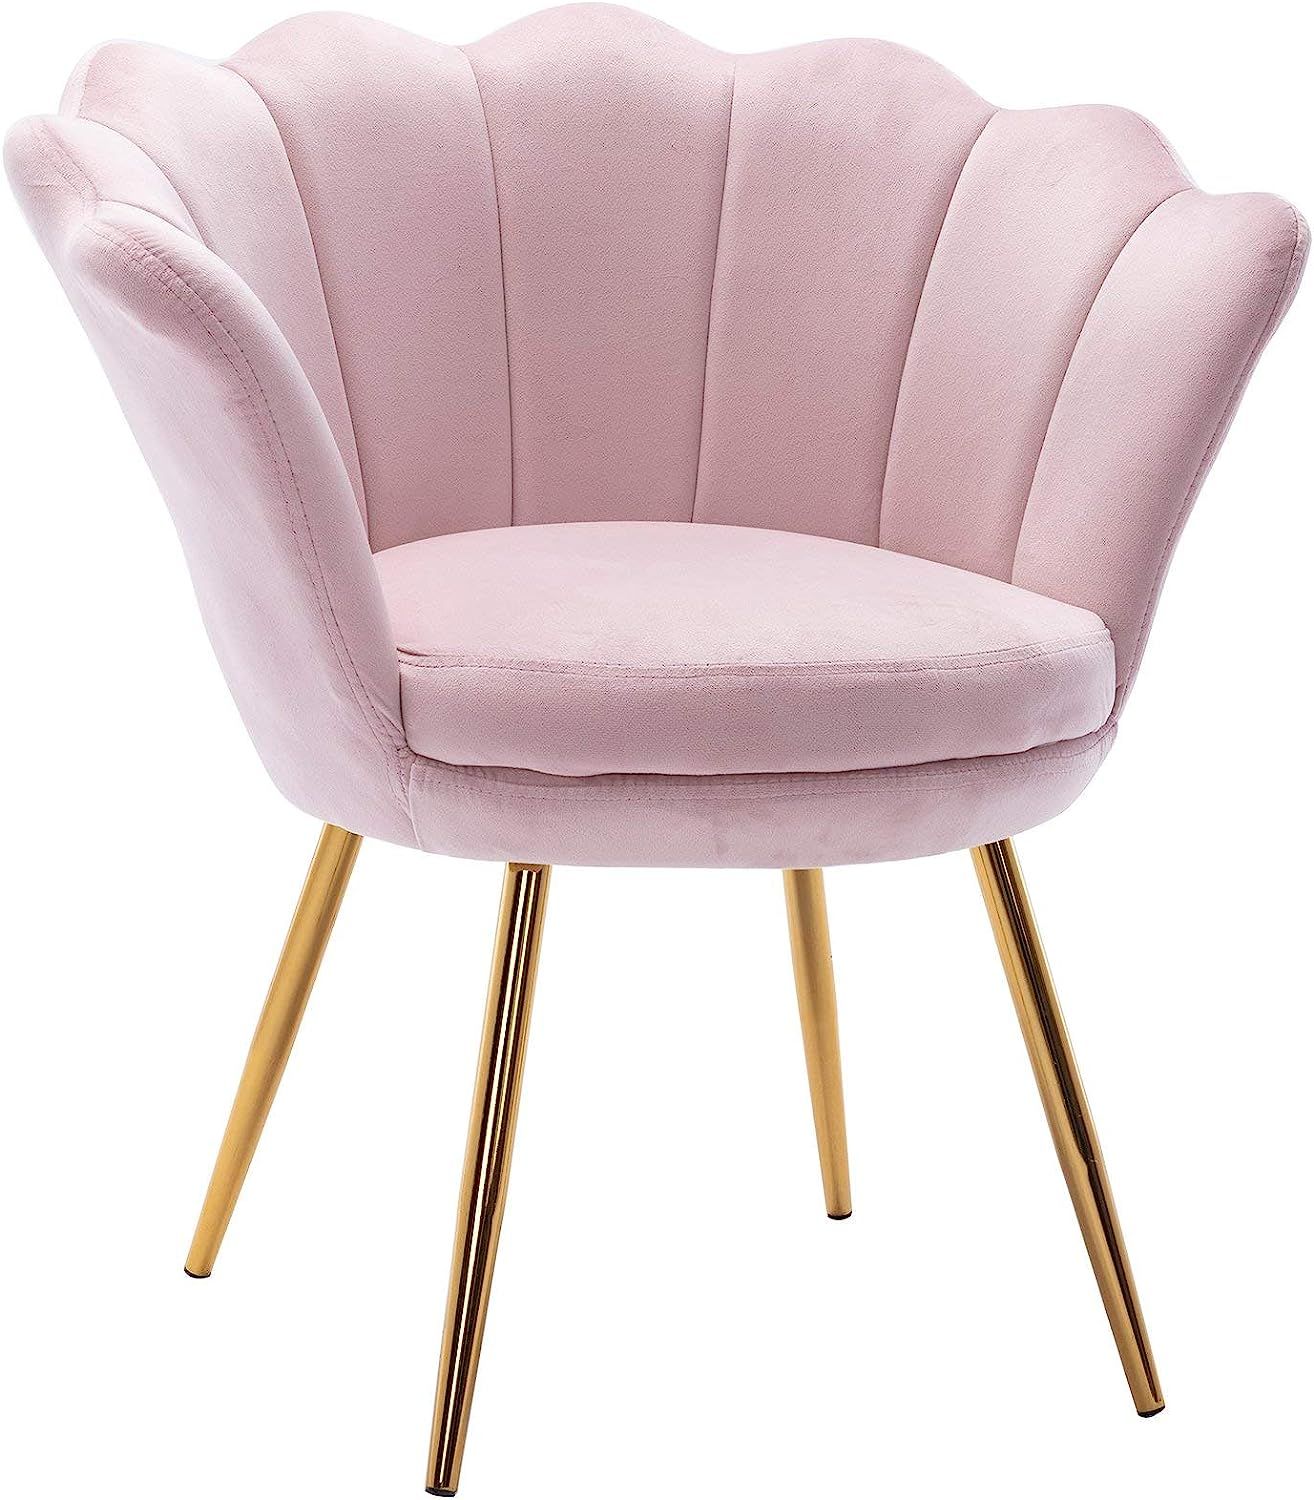 Velvet Upholstered Living Room Chair, Comfy Mid-Century Modern Light Pink Vanity Chair with Seash... | Amazon (US)